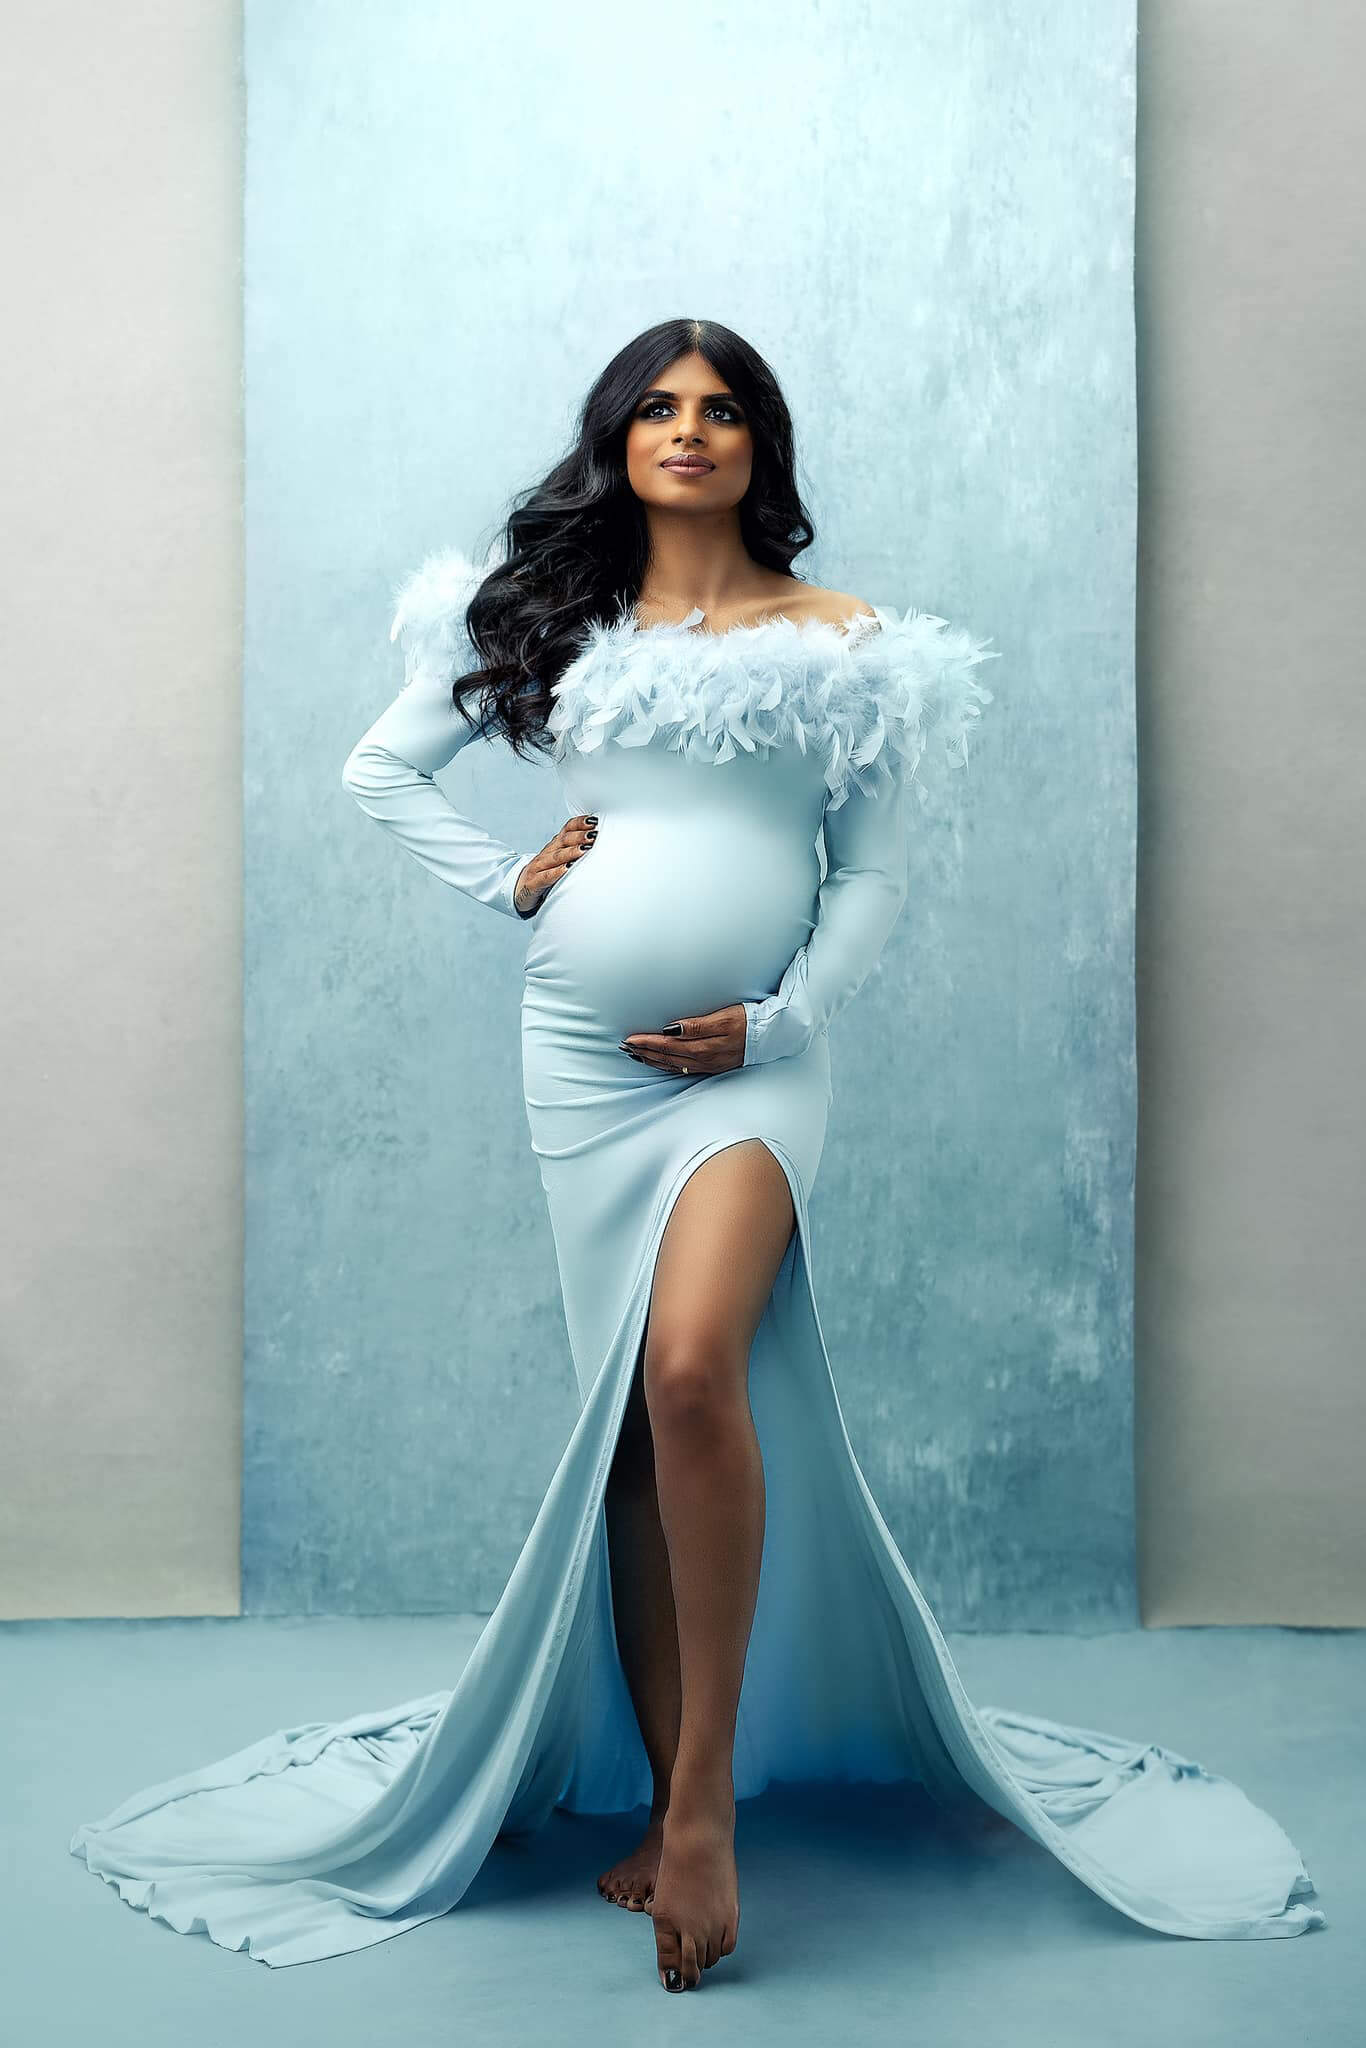 Blue Maternity Dresses for Photoshoot Extra Fluffy Tulle Tiered Ruffled  Pregnant Dress Women Sweetheart Off Shoulder Maxi Gown